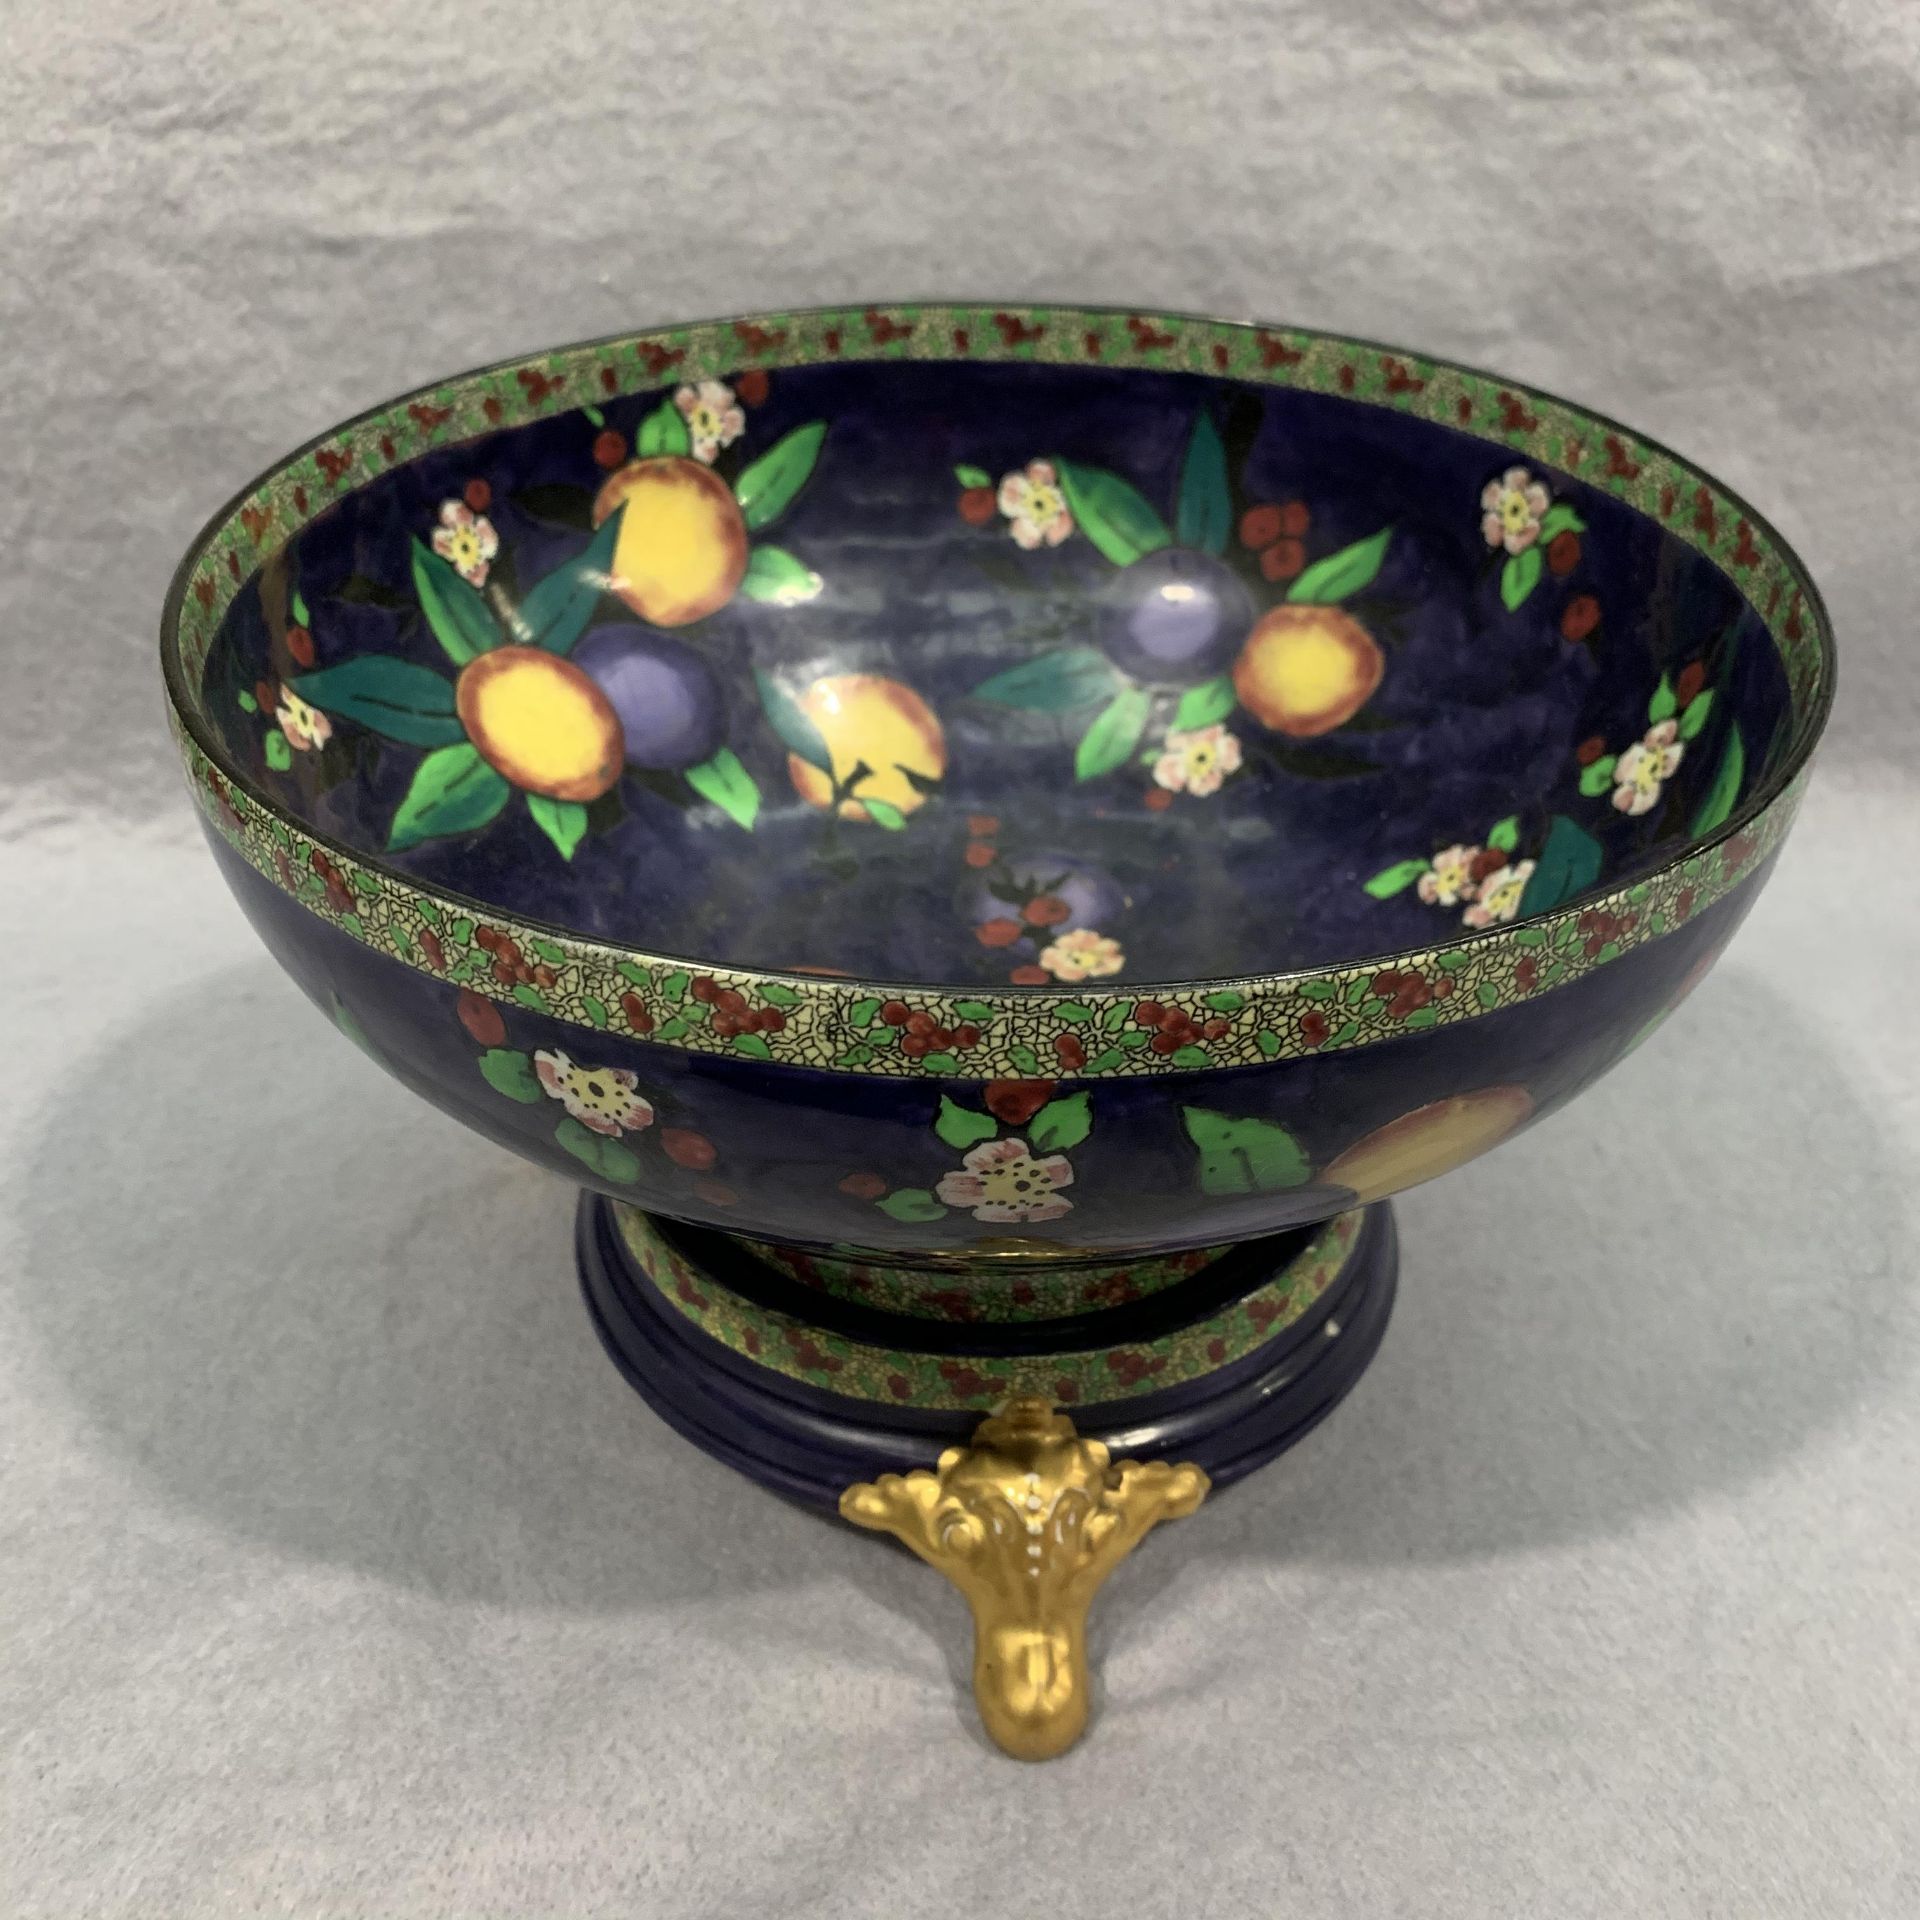 Carltonware blue fruit and floral patterned bowl 25cm diameter on matching three foot stand